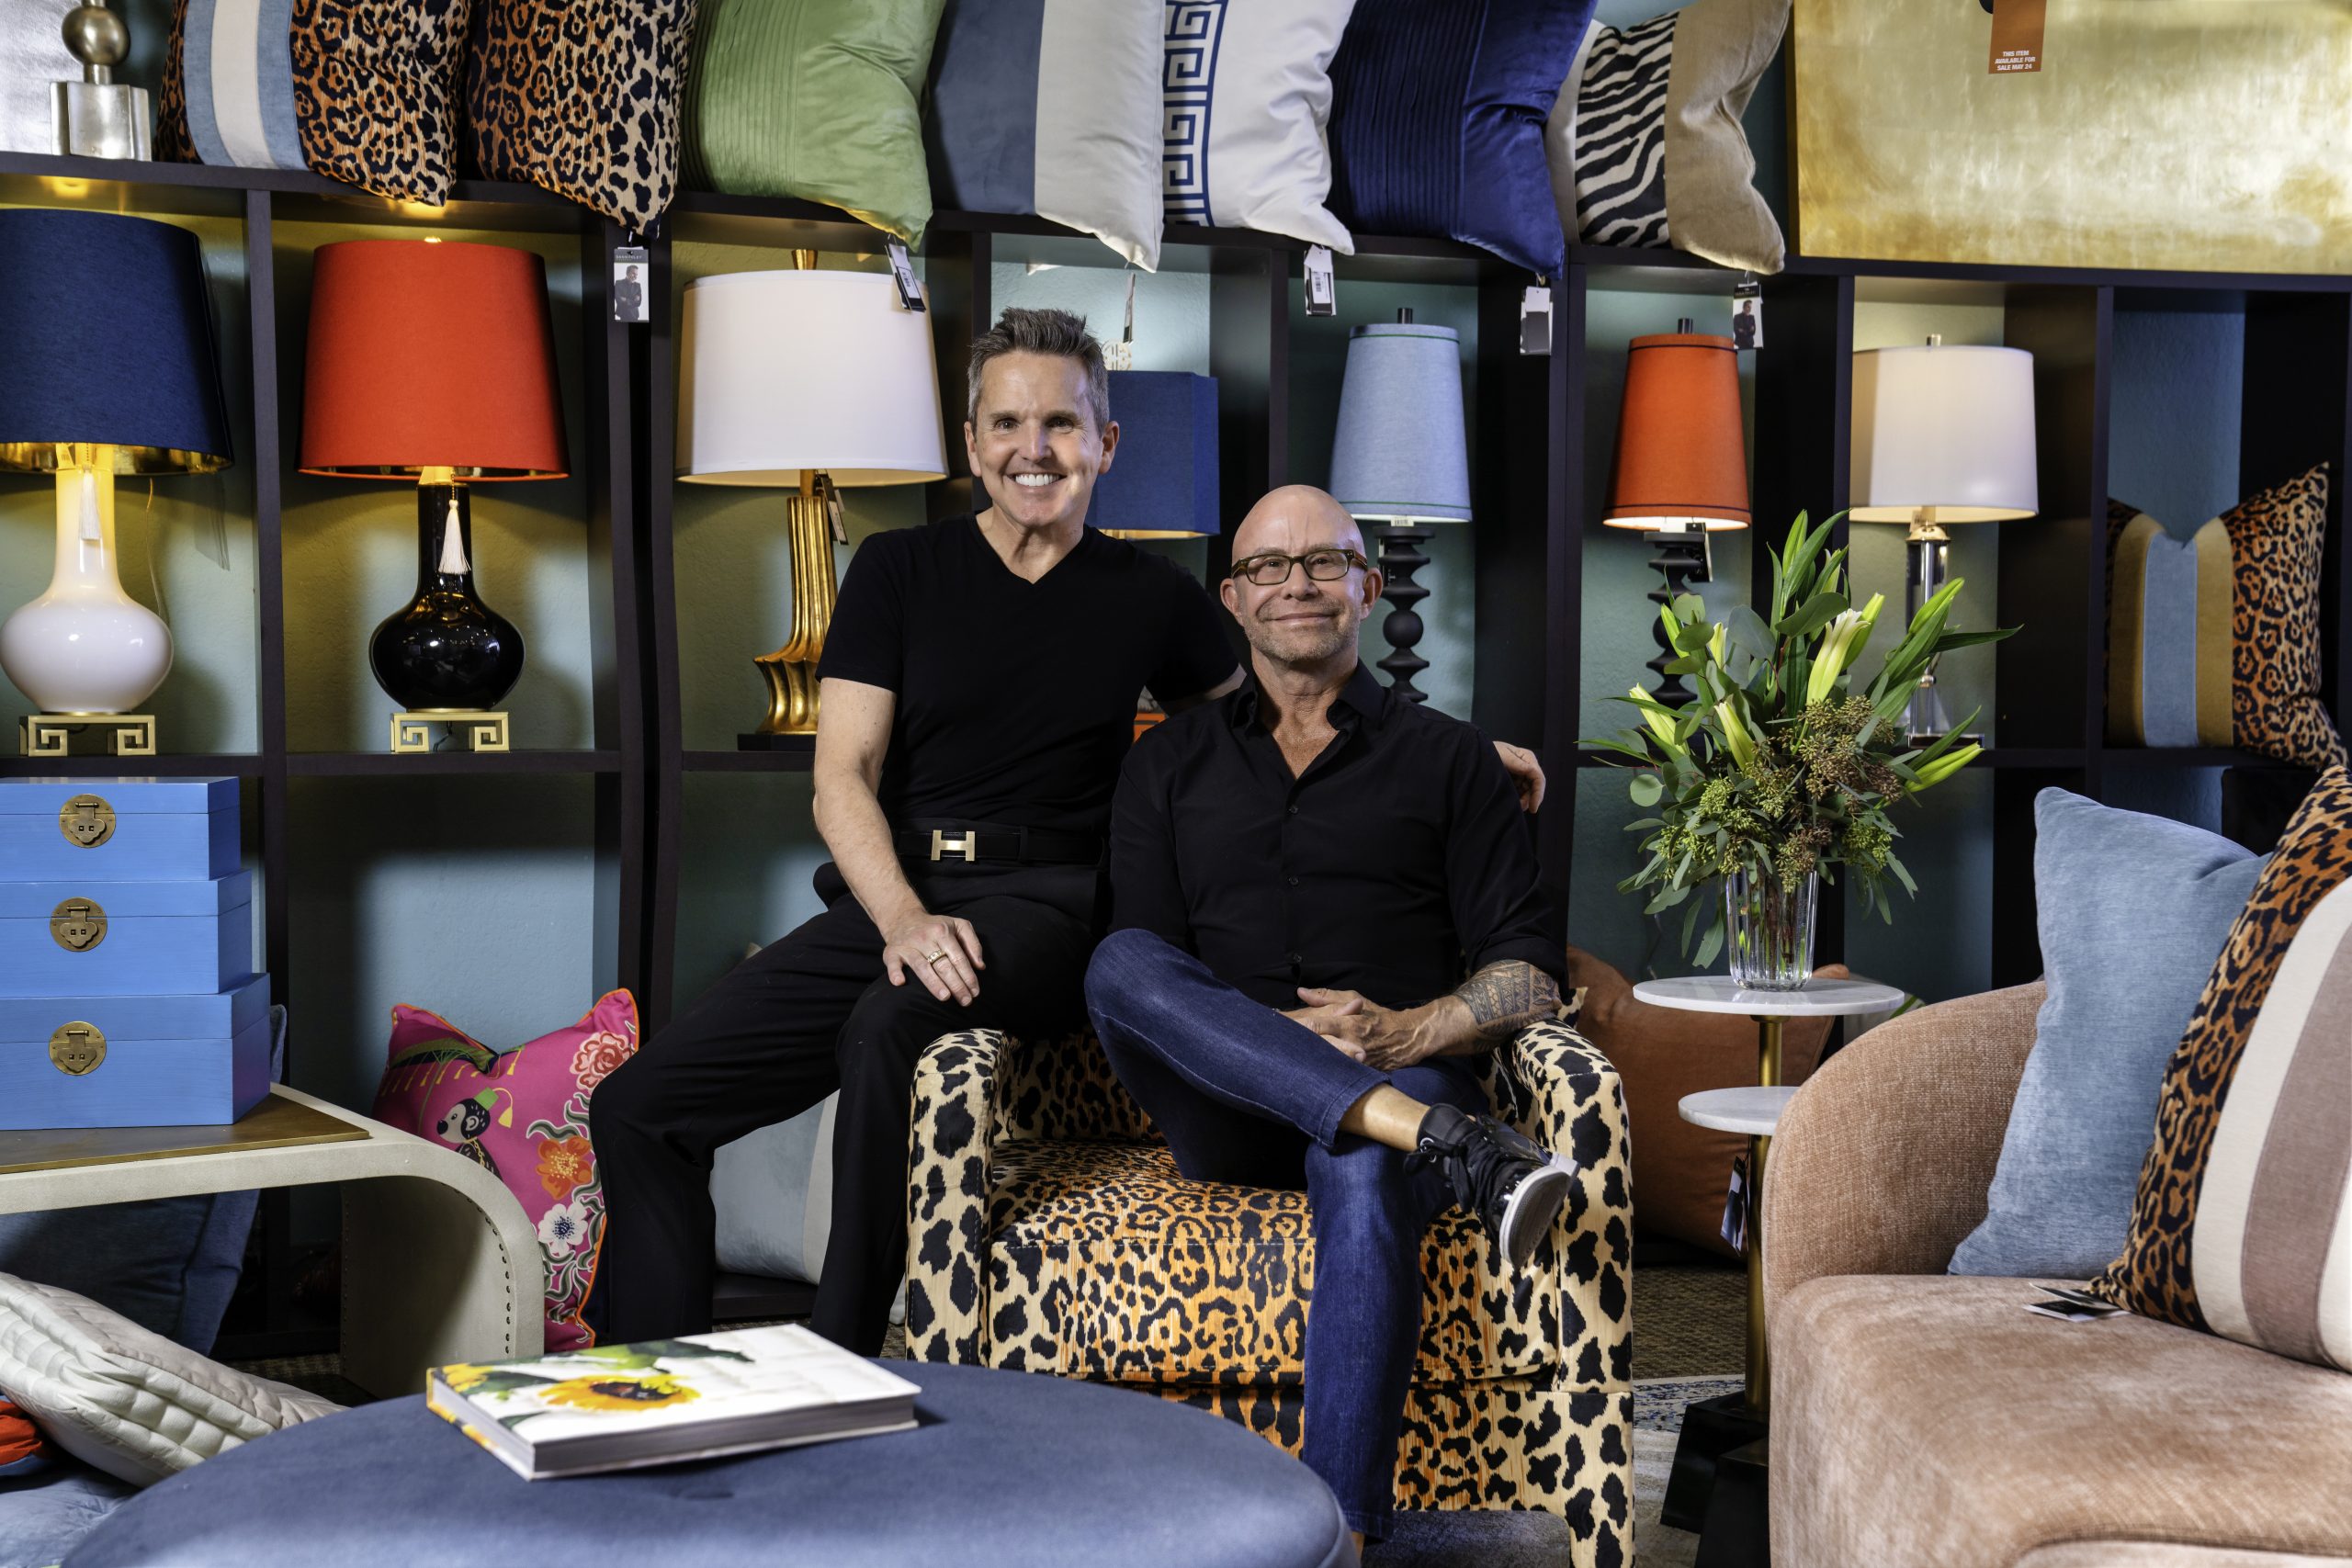 Dann Foley and Beau Stinnette and their new furniture collection at Revivals